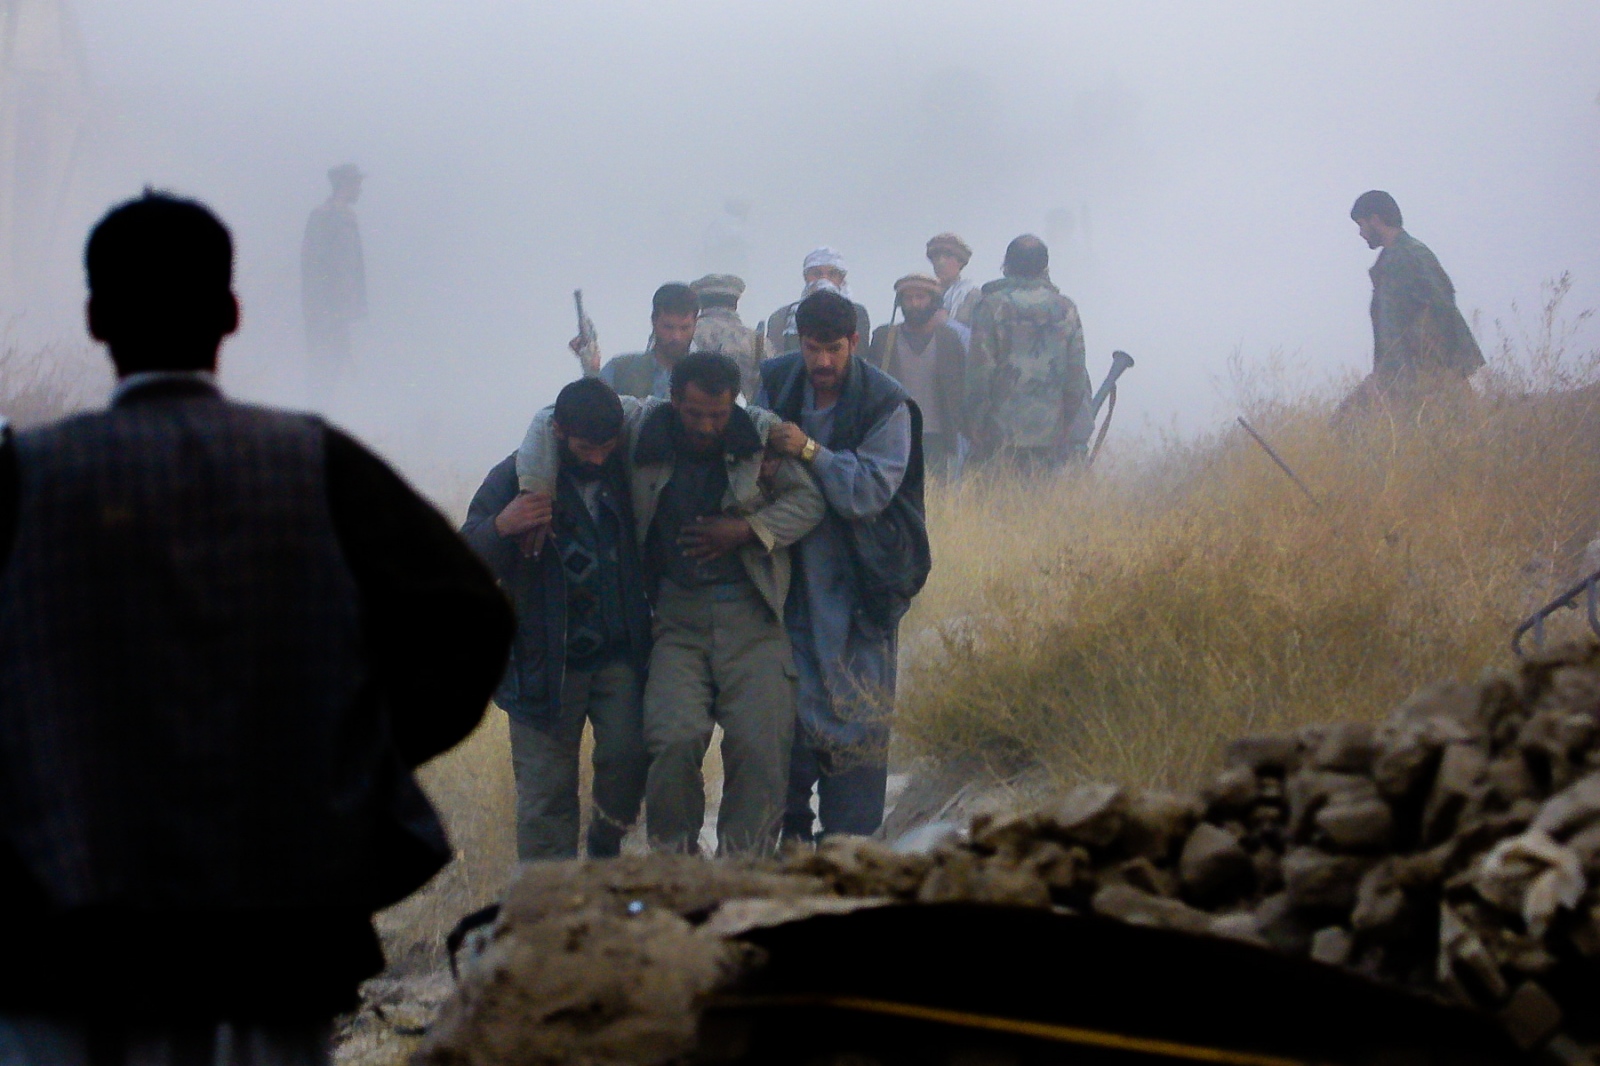 Onward to Kabul - An enormous explosion happens nearby, knocking me against...